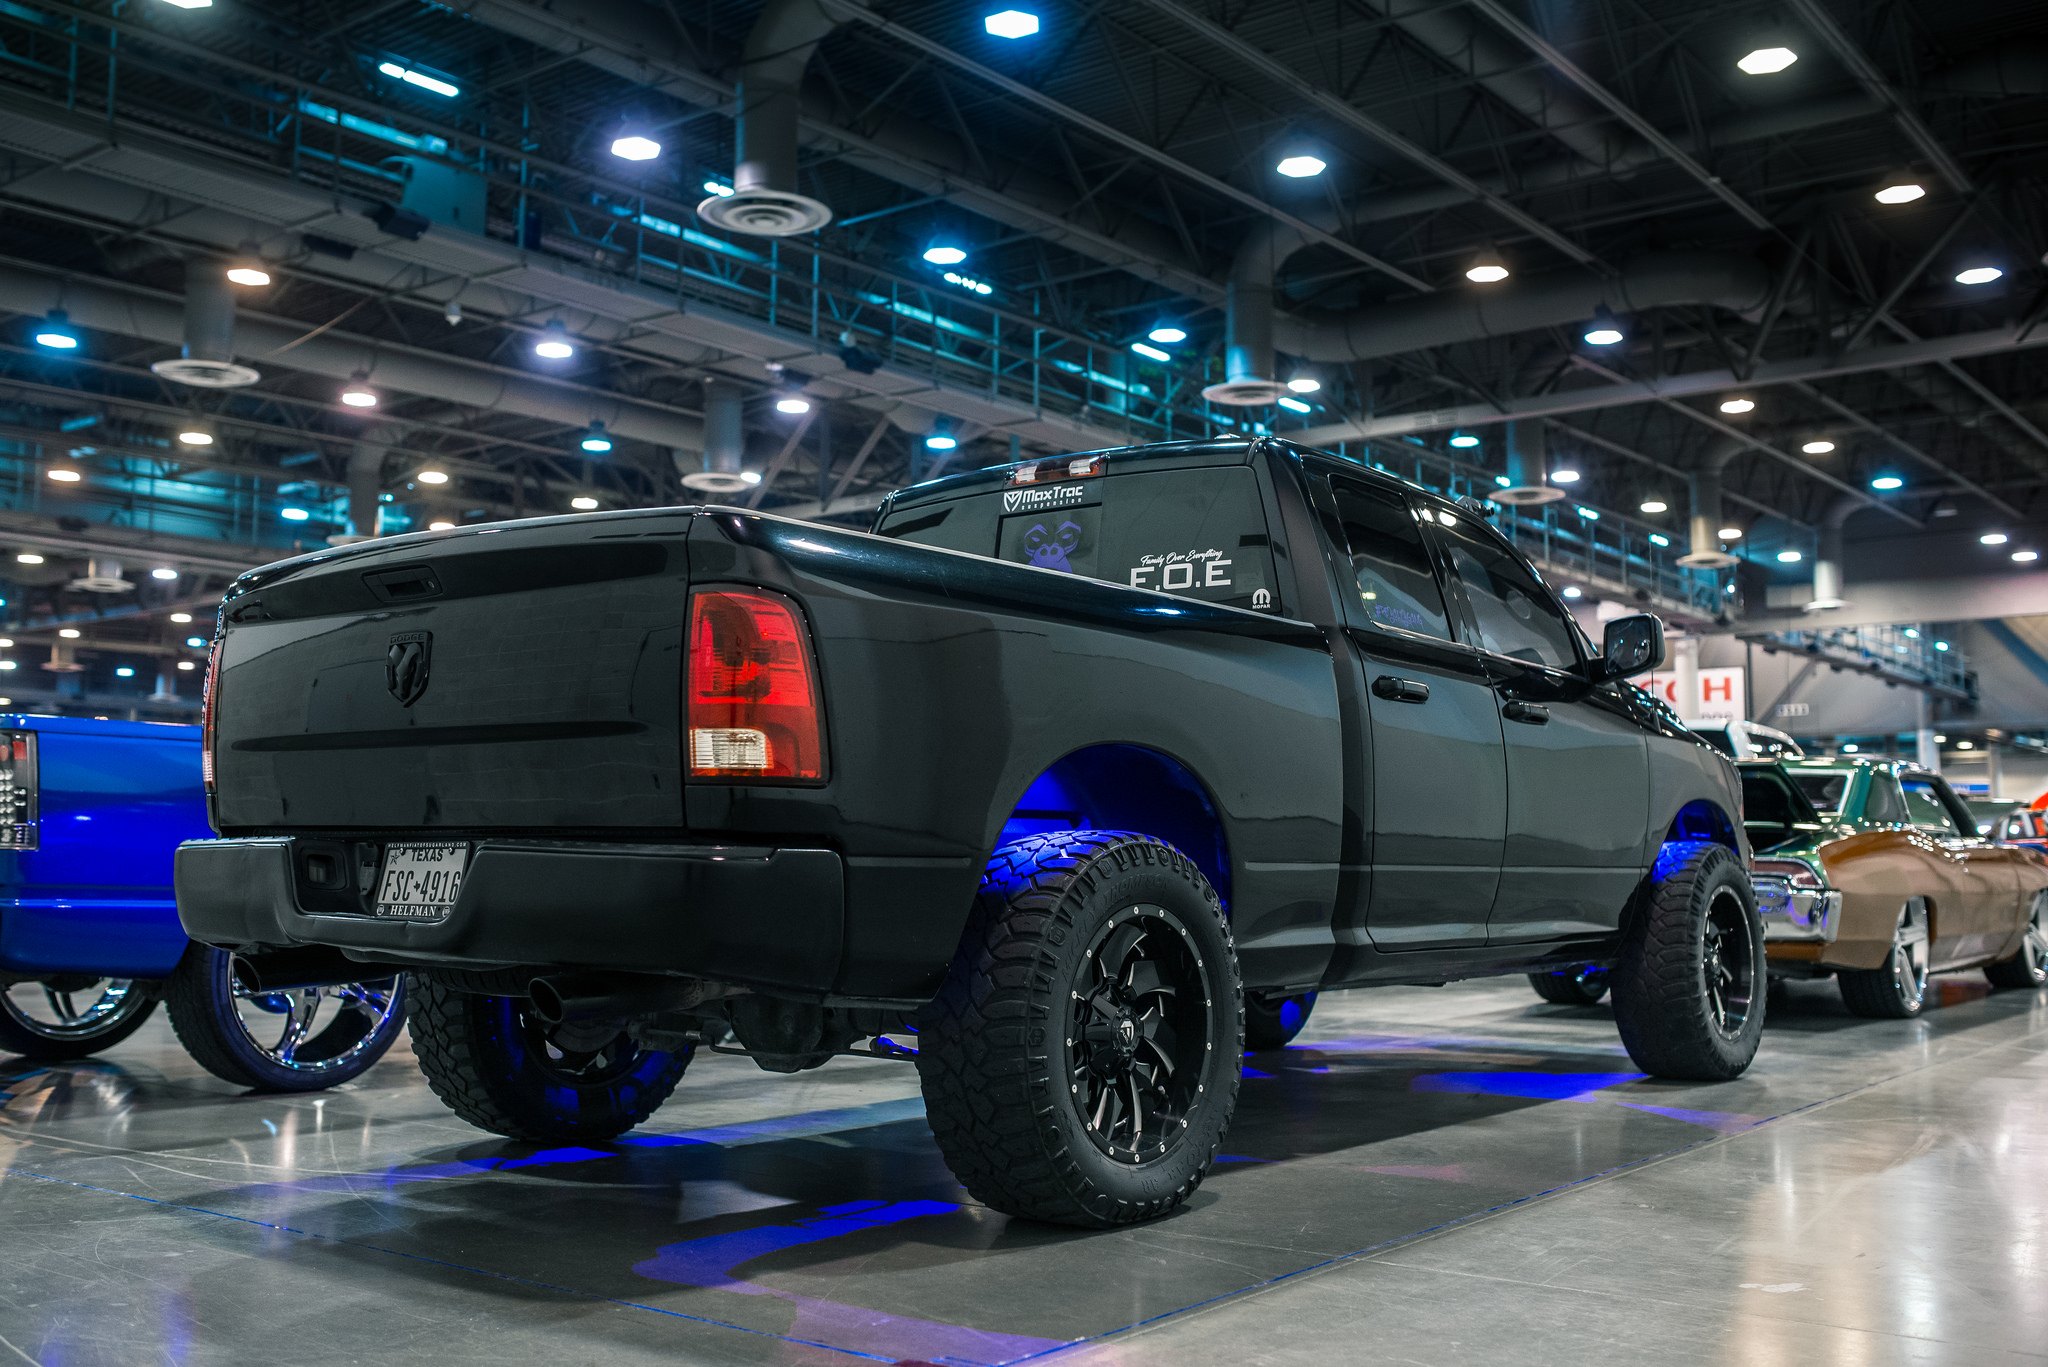 Mickey Thompson Tires on Black Dodge Ram 1500 - Photo by Fuel Offroad